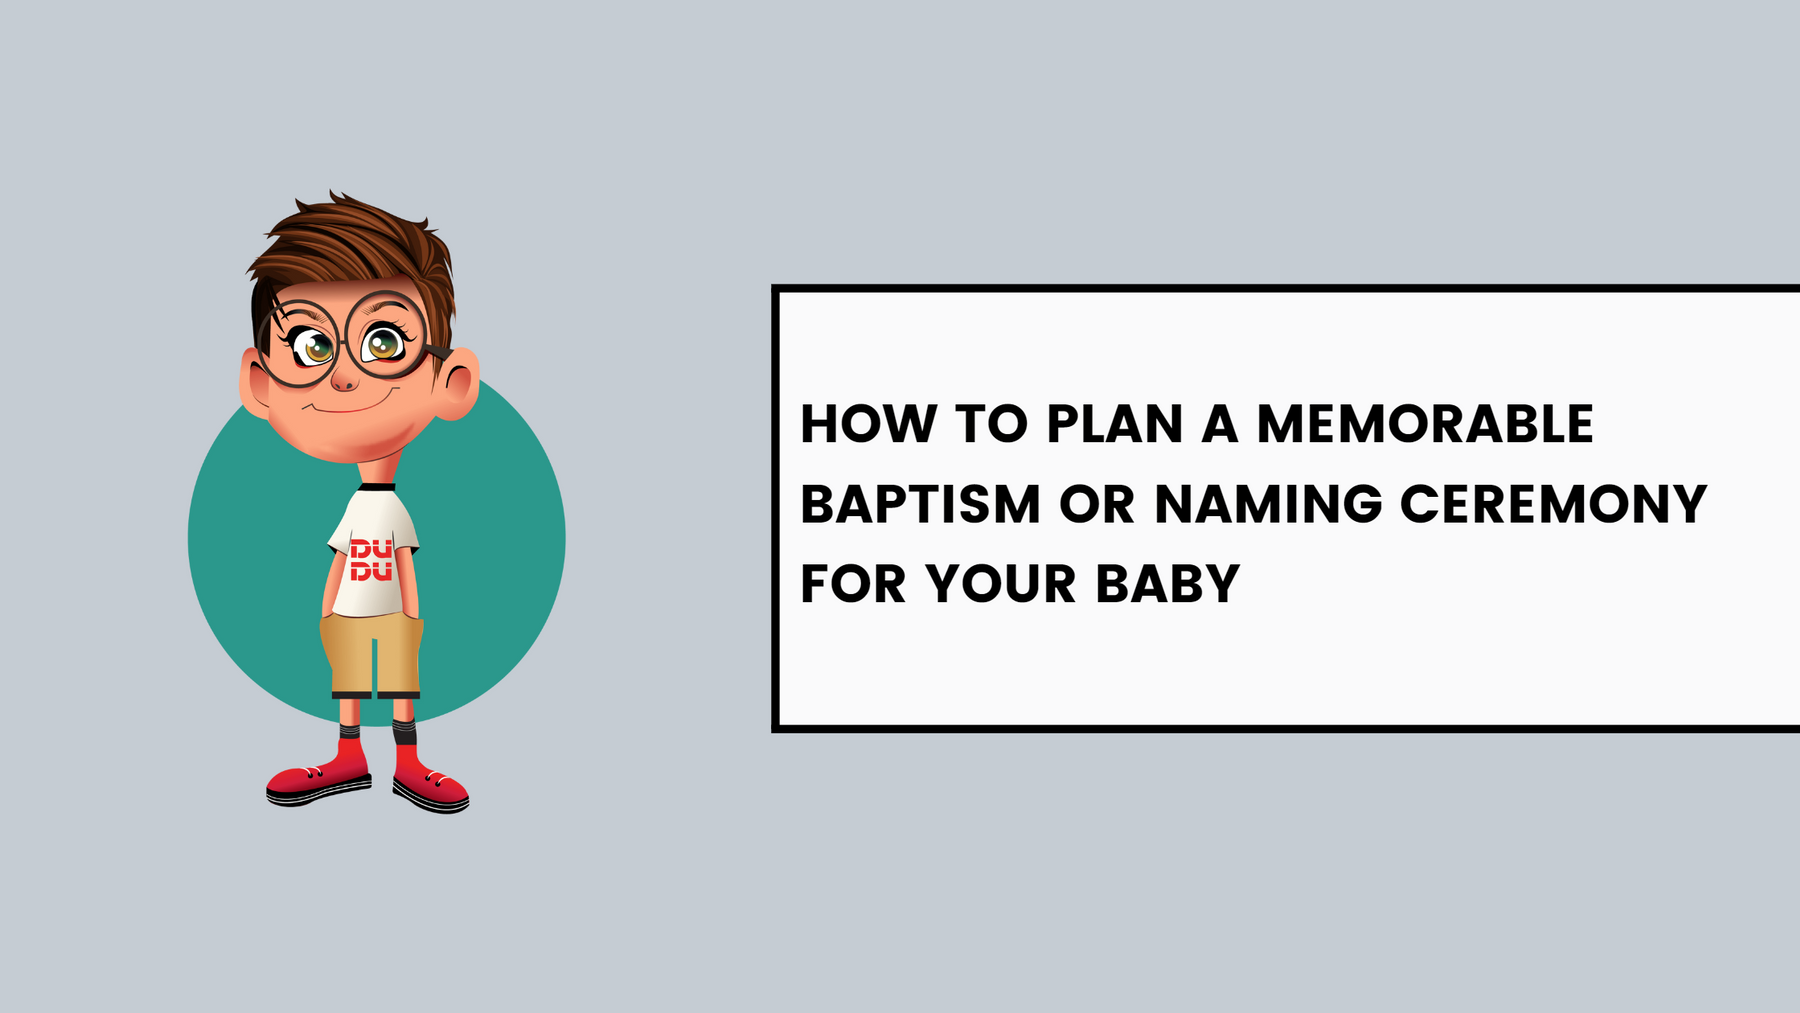 How To Plan A Memorable Baptism Or Naming Ceremony For Your Baby